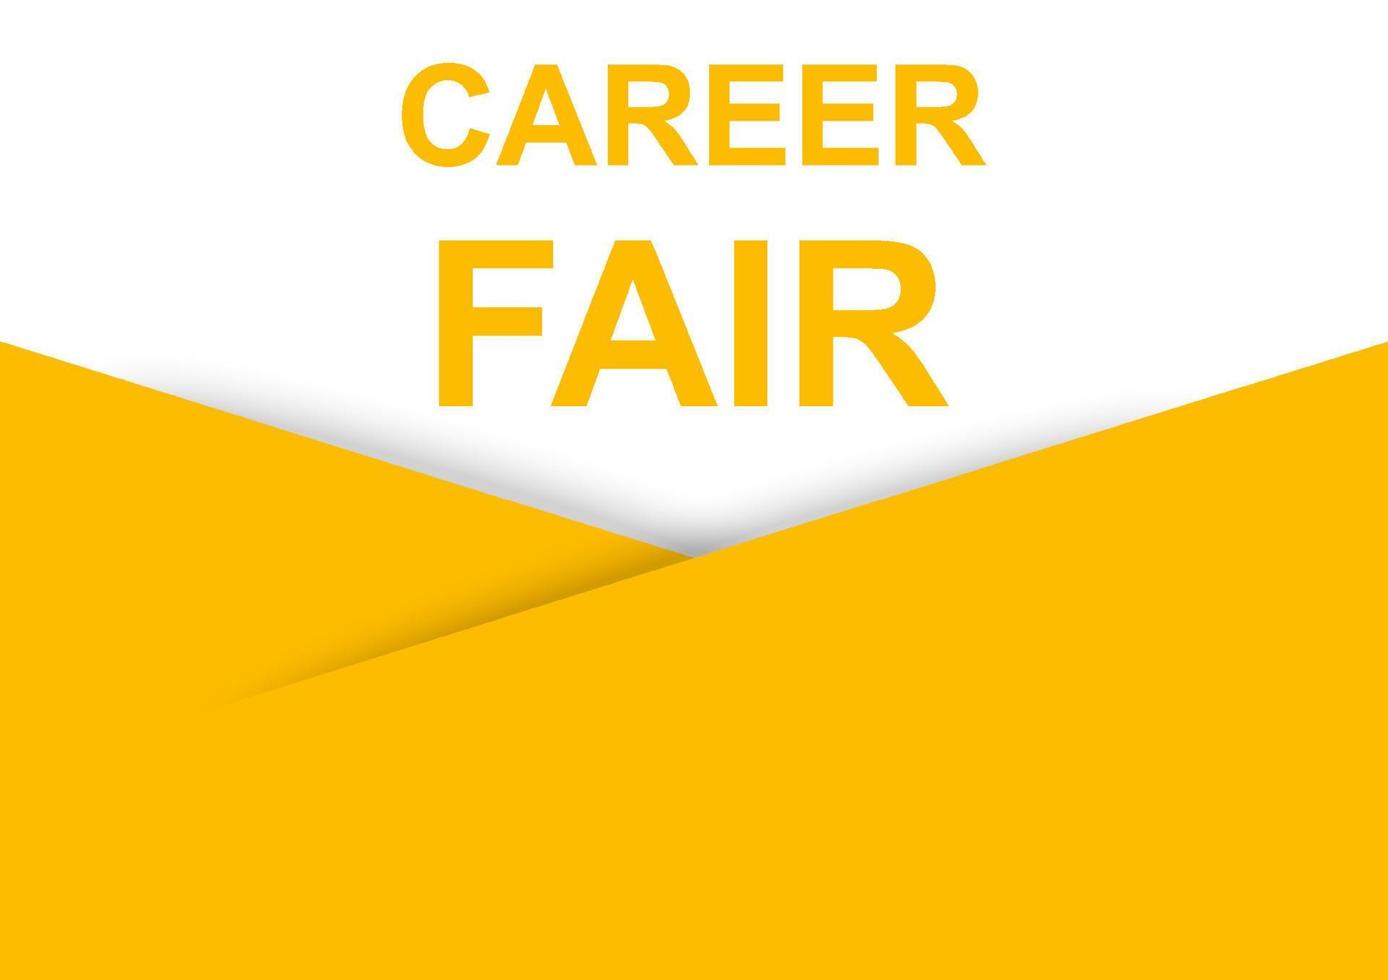 Career fair banner vector with copy space for business, marketing, flyers, banners, presentations and posters. illustration